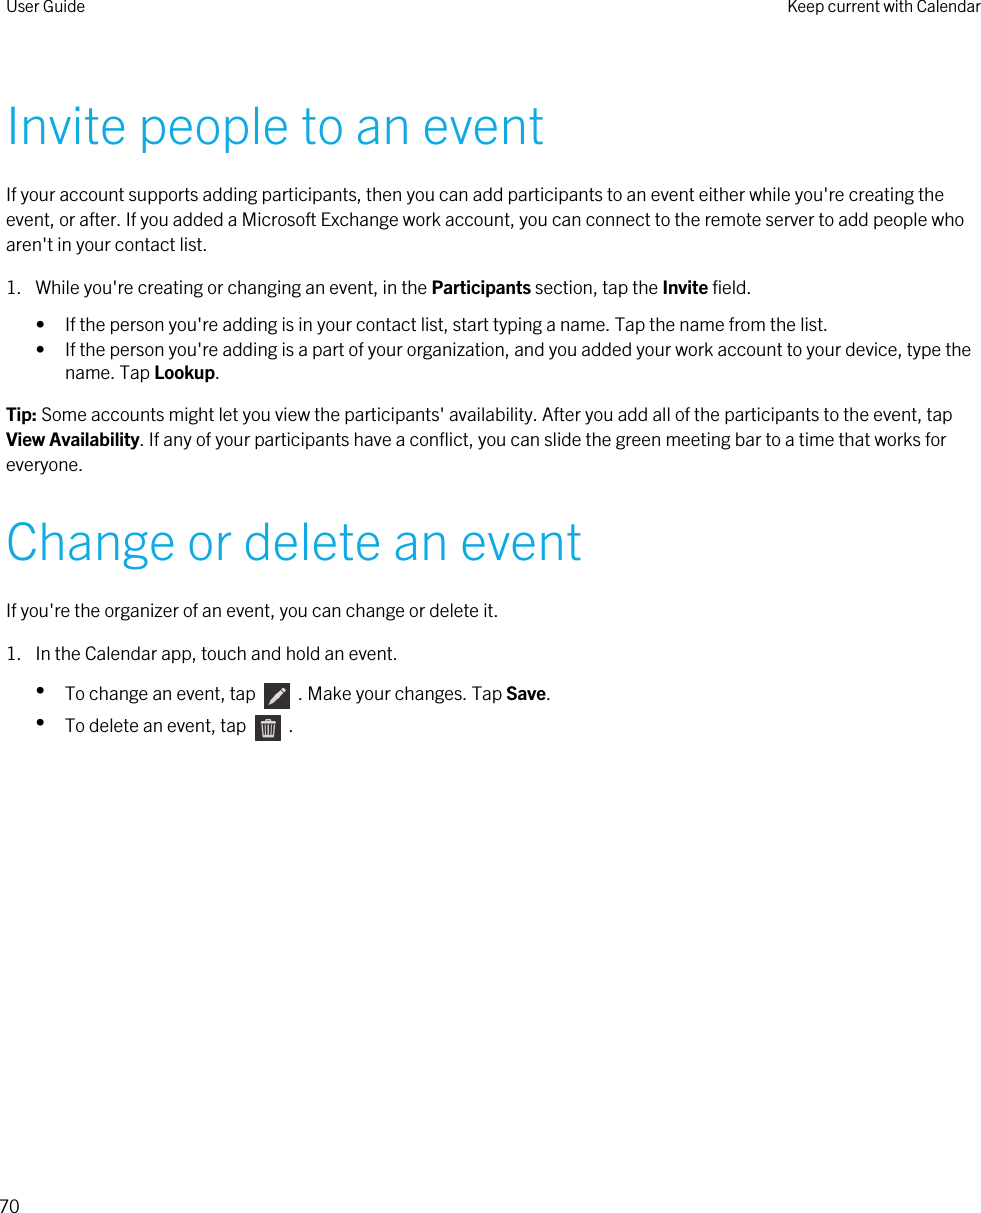 Invite people to an eventIf your account supports adding participants, then you can add participants to an event either while you&apos;re creating the event, or after. If you added a Microsoft Exchange work account, you can connect to the remote server to add people who aren&apos;t in your contact list.1. While you&apos;re creating or changing an event, in the Participants section, tap the Invite field.• If the person you&apos;re adding is in your contact list, start typing a name. Tap the name from the list.• If the person you&apos;re adding is a part of your organization, and you added your work account to your device, type the name. Tap Lookup.Tip: Some accounts might let you view the participants&apos; availability. After you add all of the participants to the event, tap View Availability. If any of your participants have a conflict, you can slide the green meeting bar to a time that works for everyone.Change or delete an eventIf you&apos;re the organizer of an event, you can change or delete it.1. In the Calendar app, touch and hold an event.•To change an event, tap    . Make your changes. Tap Save.•To delete an event, tap    .User Guide Keep current with Calendar70 